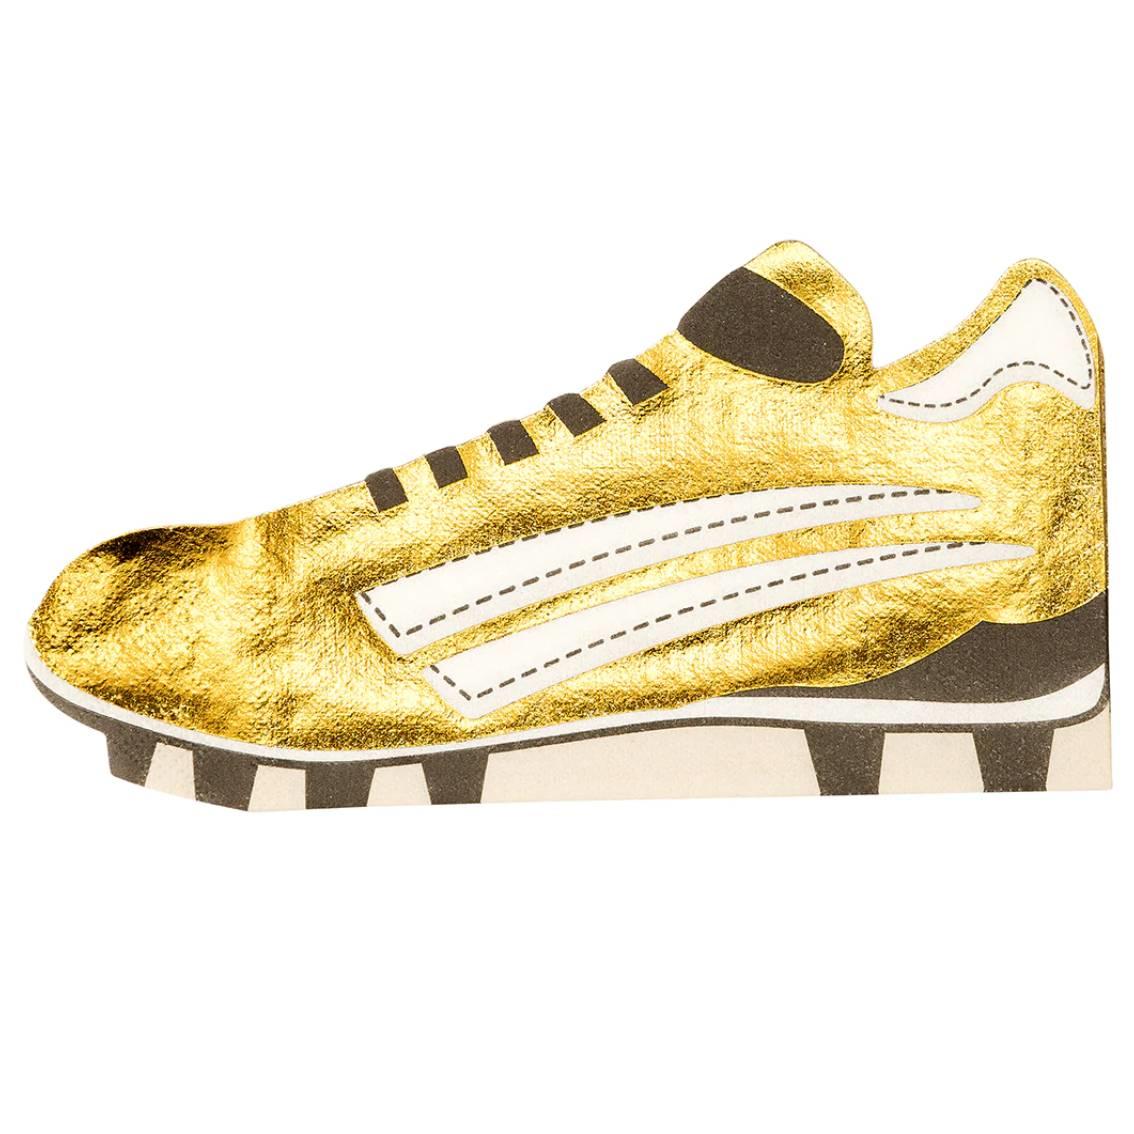 Football Champions Gold Foil Boot Shaped Napkins by Talking Tables CHAMP-NAPKIN-BOOT available here at Karnival Costumes online party shop